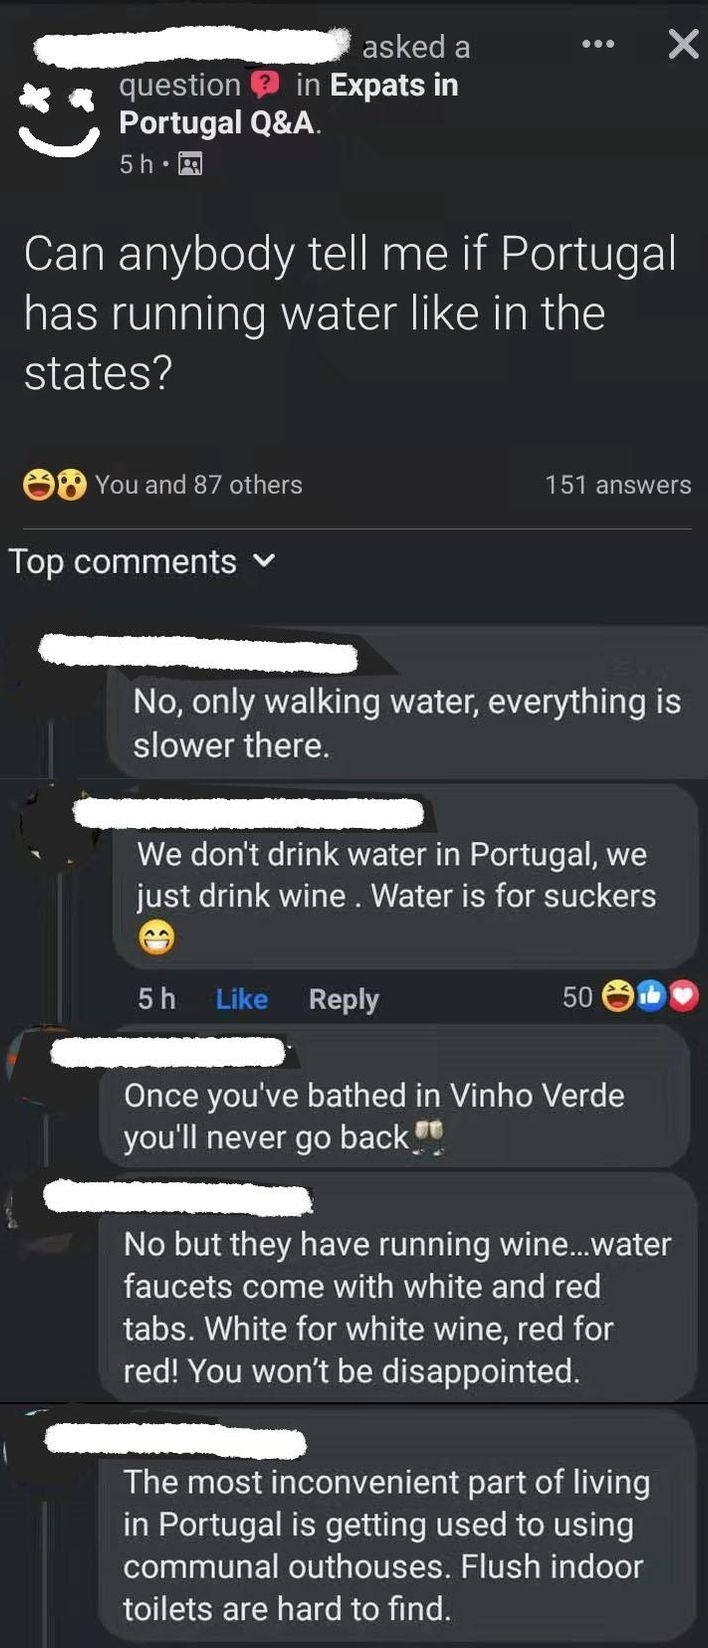 Summarized text: A Q&amp;amp;A discussion satirizes typical online expert responses by suggesting drinking wine instead of water, reflecting a stereotype about Portugal